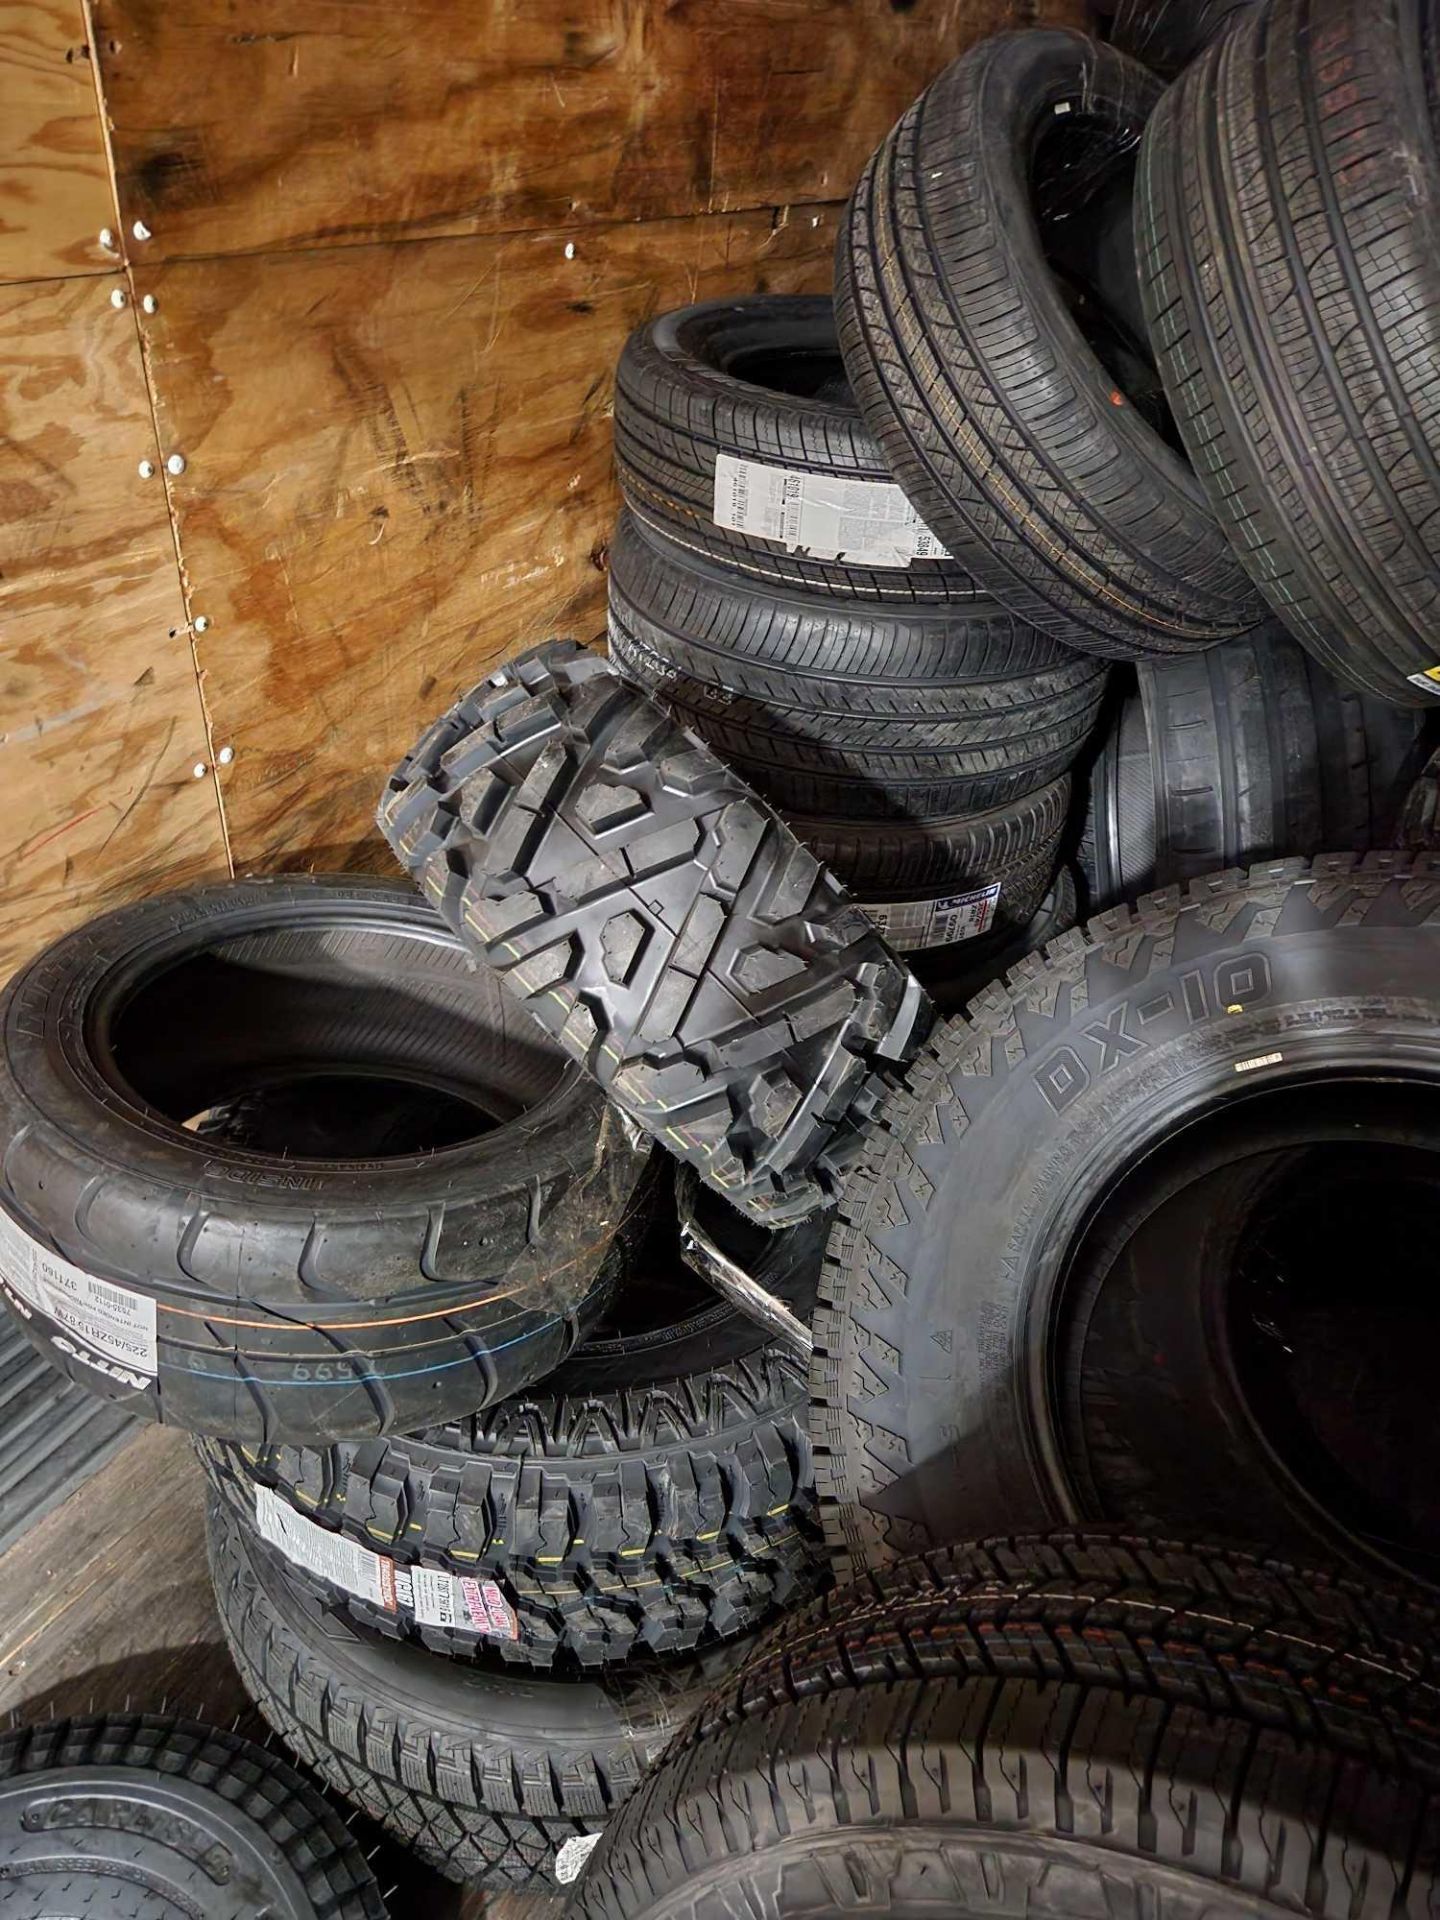 Semi Load of Tires - Image 2 of 11